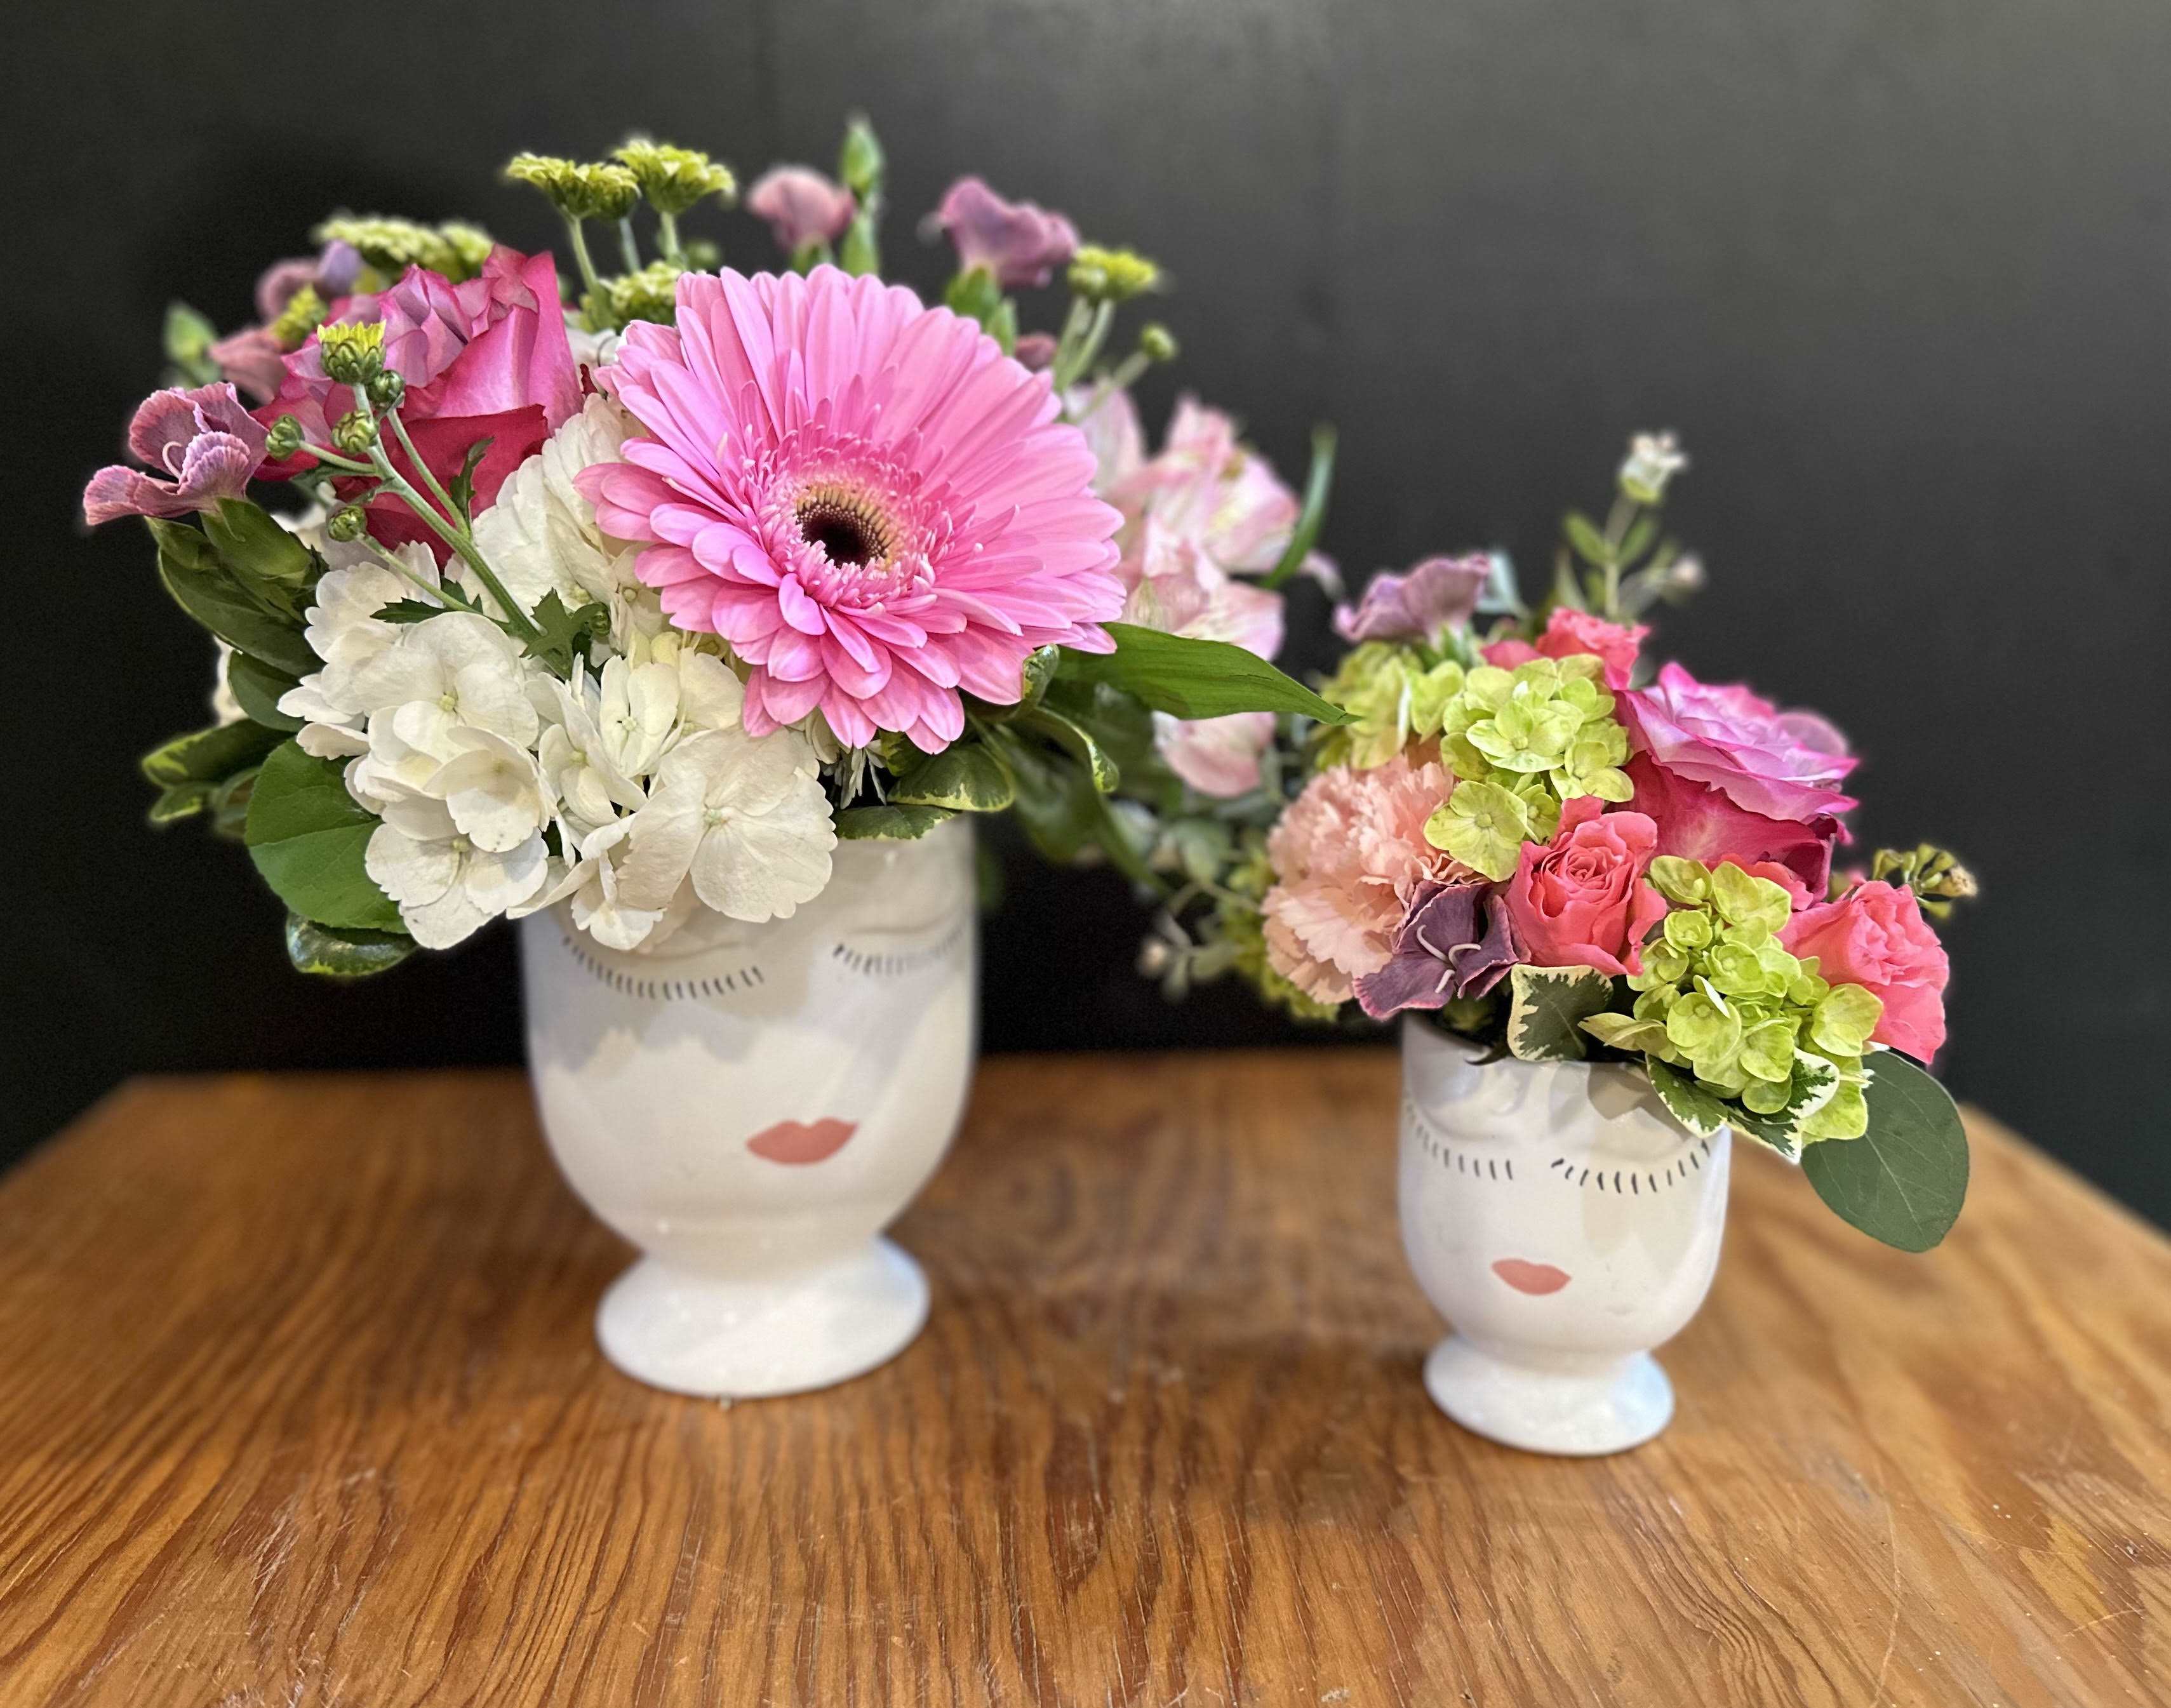 Mommy &amp; Me - This set of two arrangements are sure to delight any Mom.  You and Mommy are the stars of these whimsical floral creations .  .  OUR DESIGNERS WILL USE  A FABULOUS SEASONAL MIX OF FLORALS .  Approx 11&quot; tall and 6&quot; tall.   Order early limited quantities available.